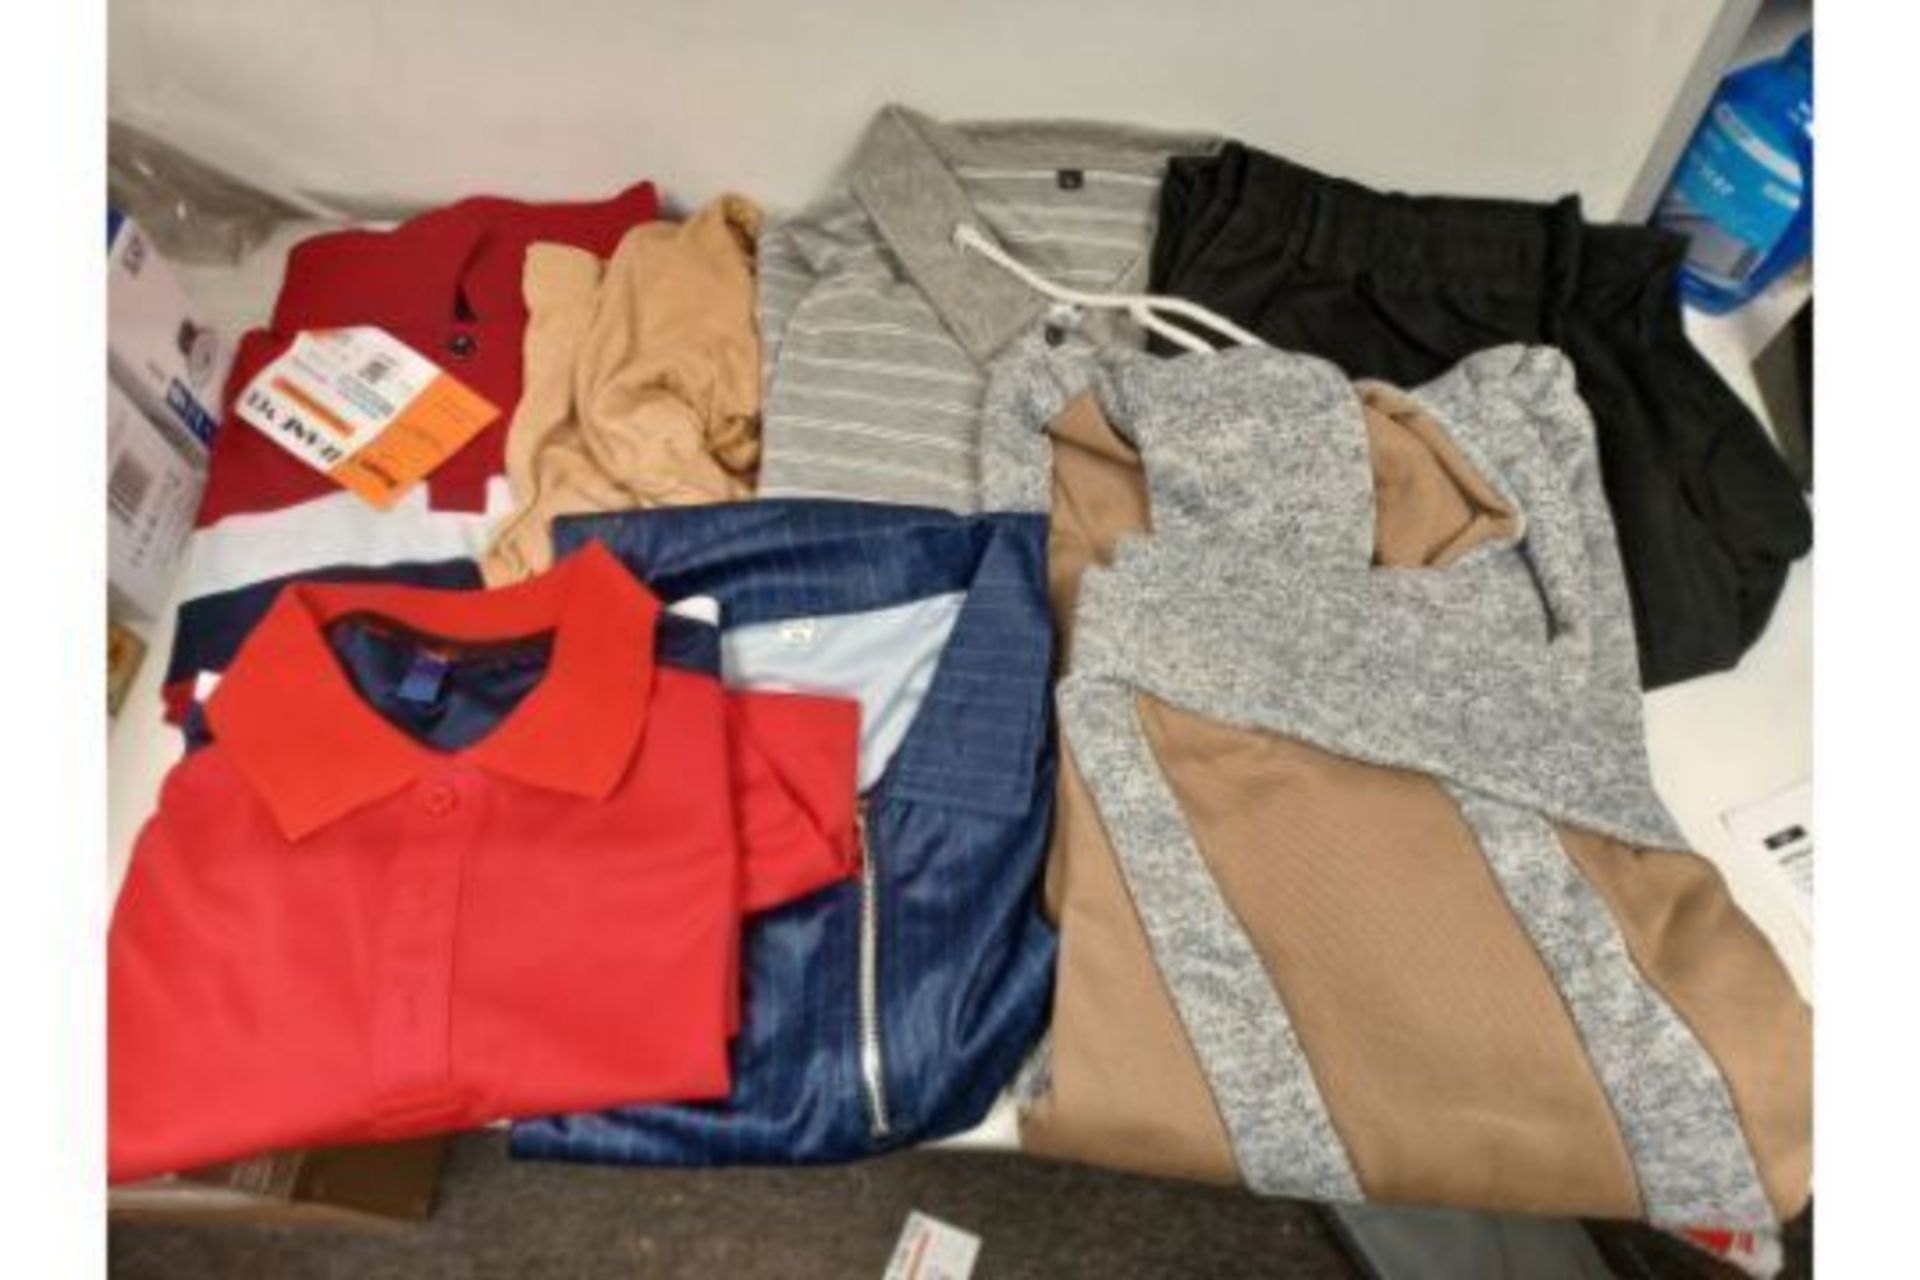 25 X BRAND NEW ASSORTED MENSWEAR LOT INCLUDING T SHIRTS, JUMPERS, HOODIES ETC